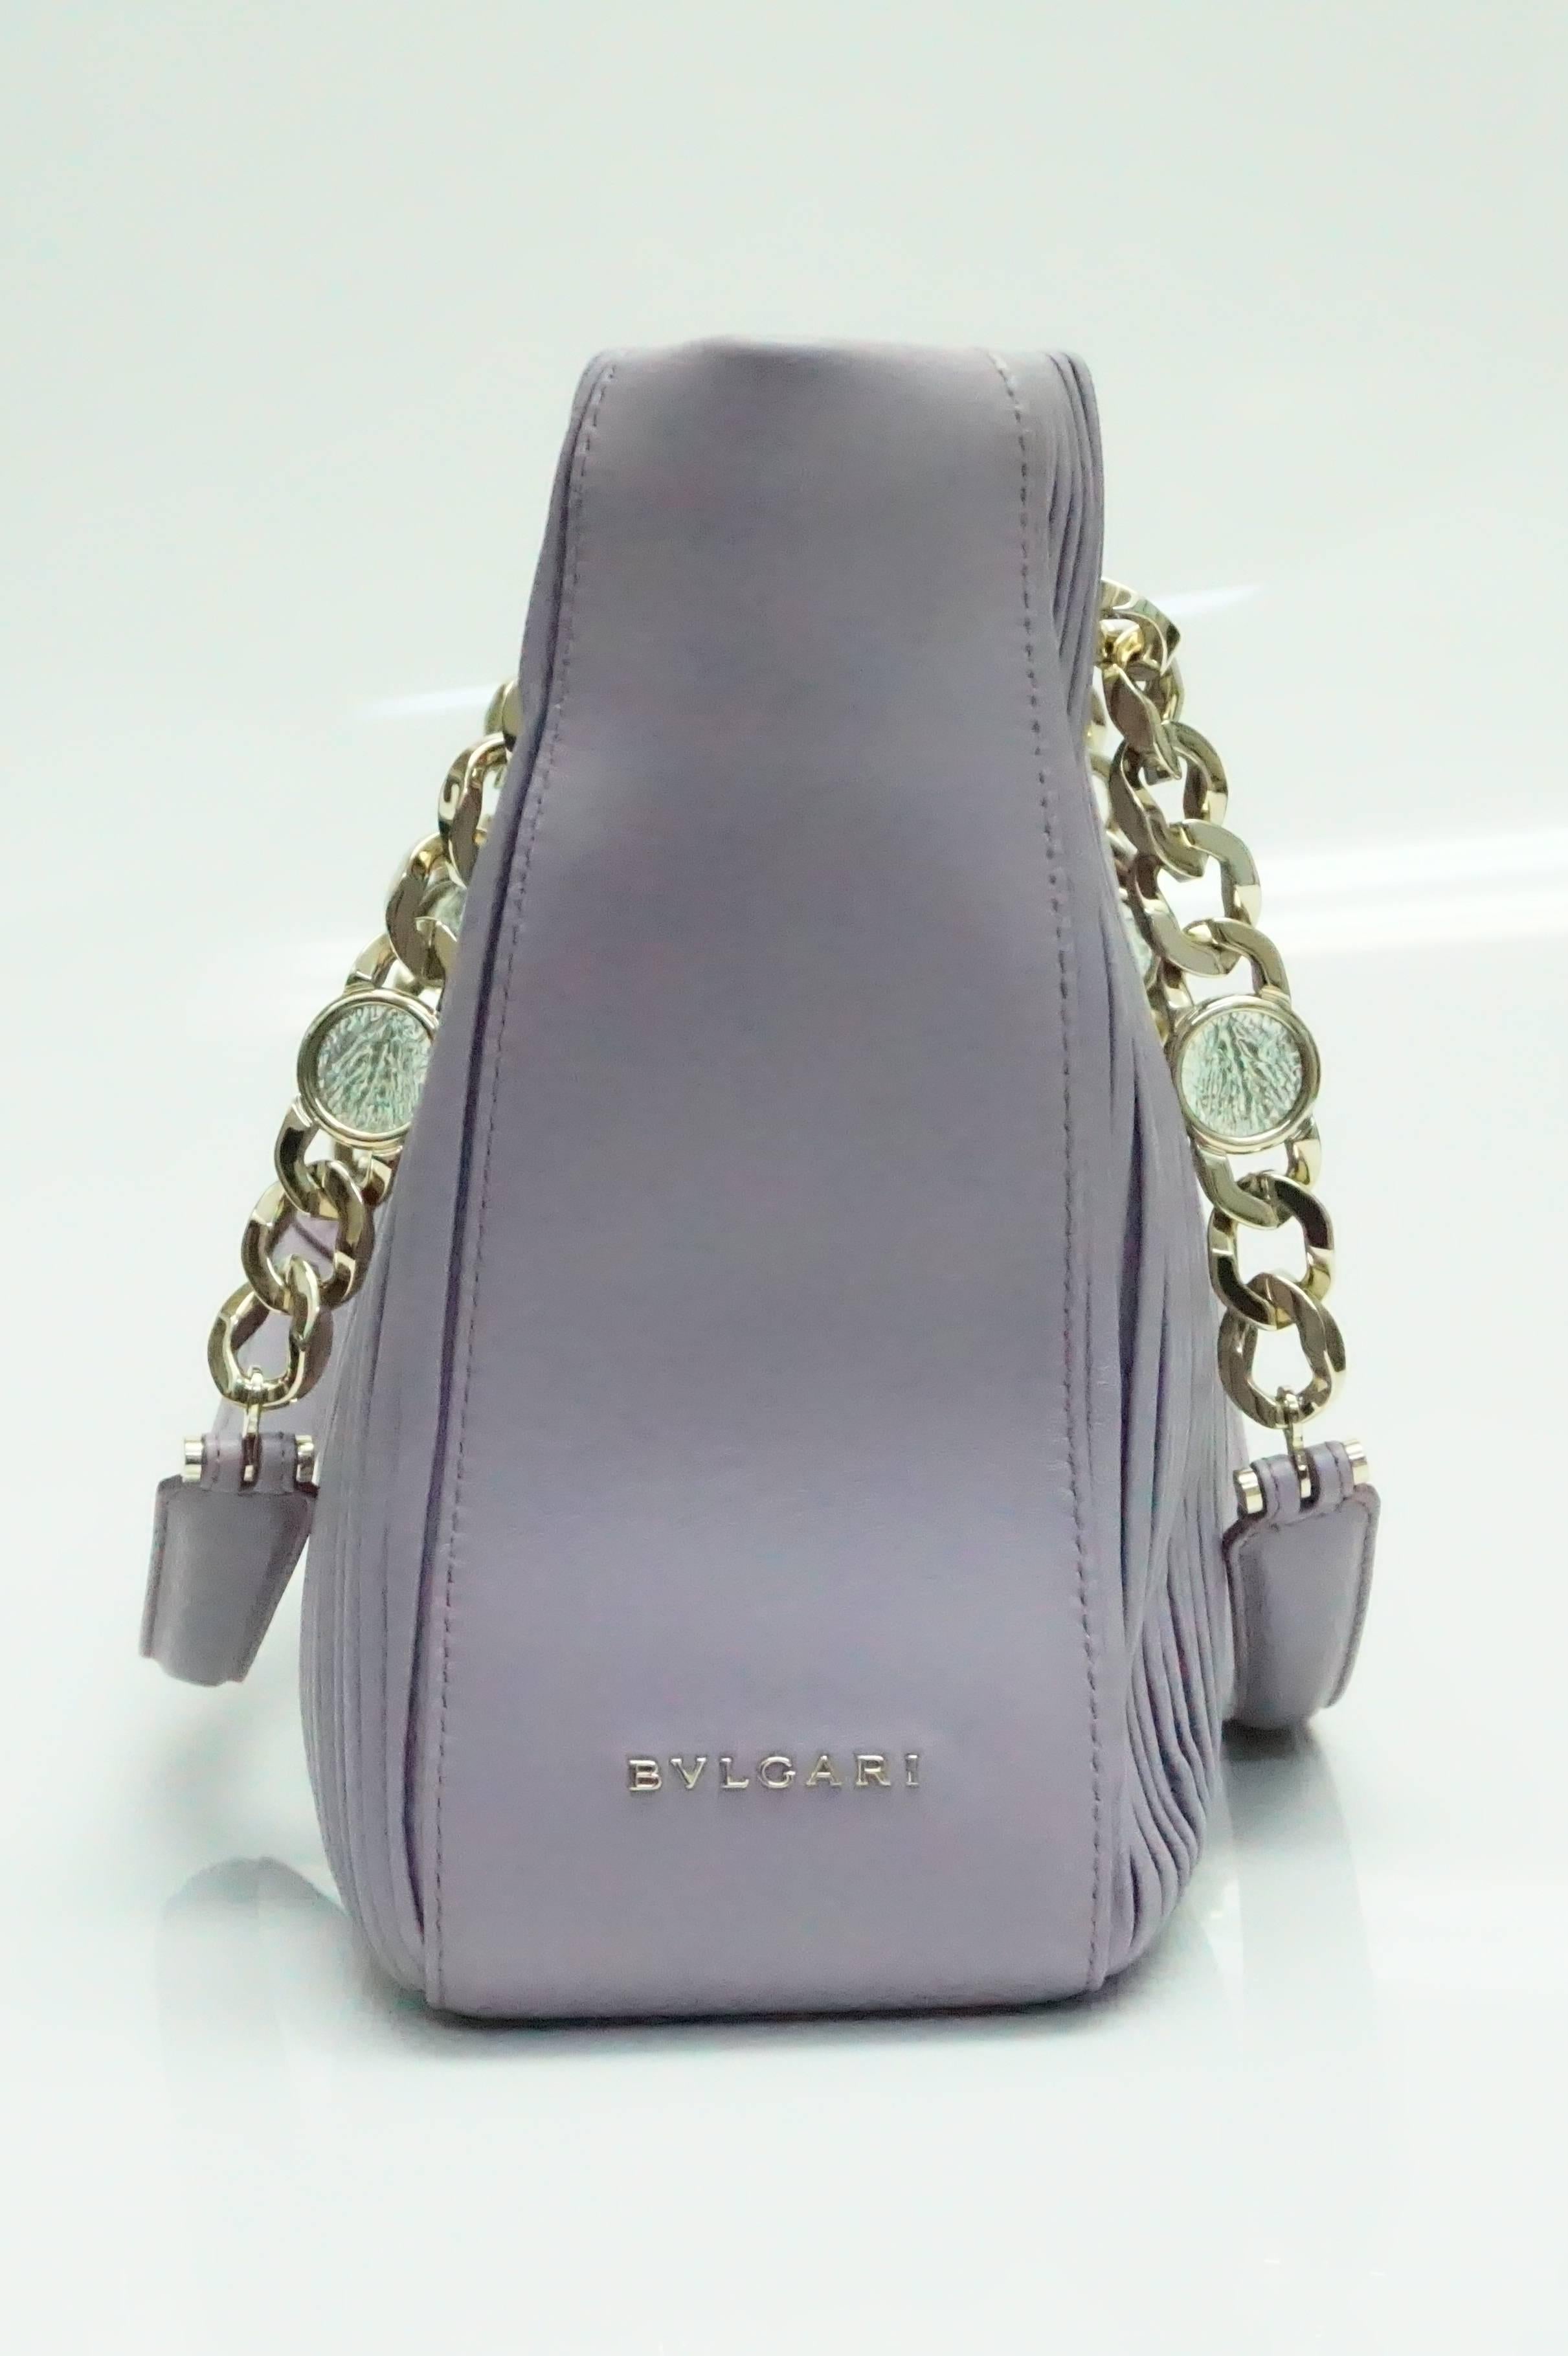 Bvlgari Lavender Monte Plisse Tote - SHW  This elegant and unusual leather bag is in excellent condition. The bag has inverted pleats on the front and back. The handles are silver chain linked with a glass looking detail in between and meets in the